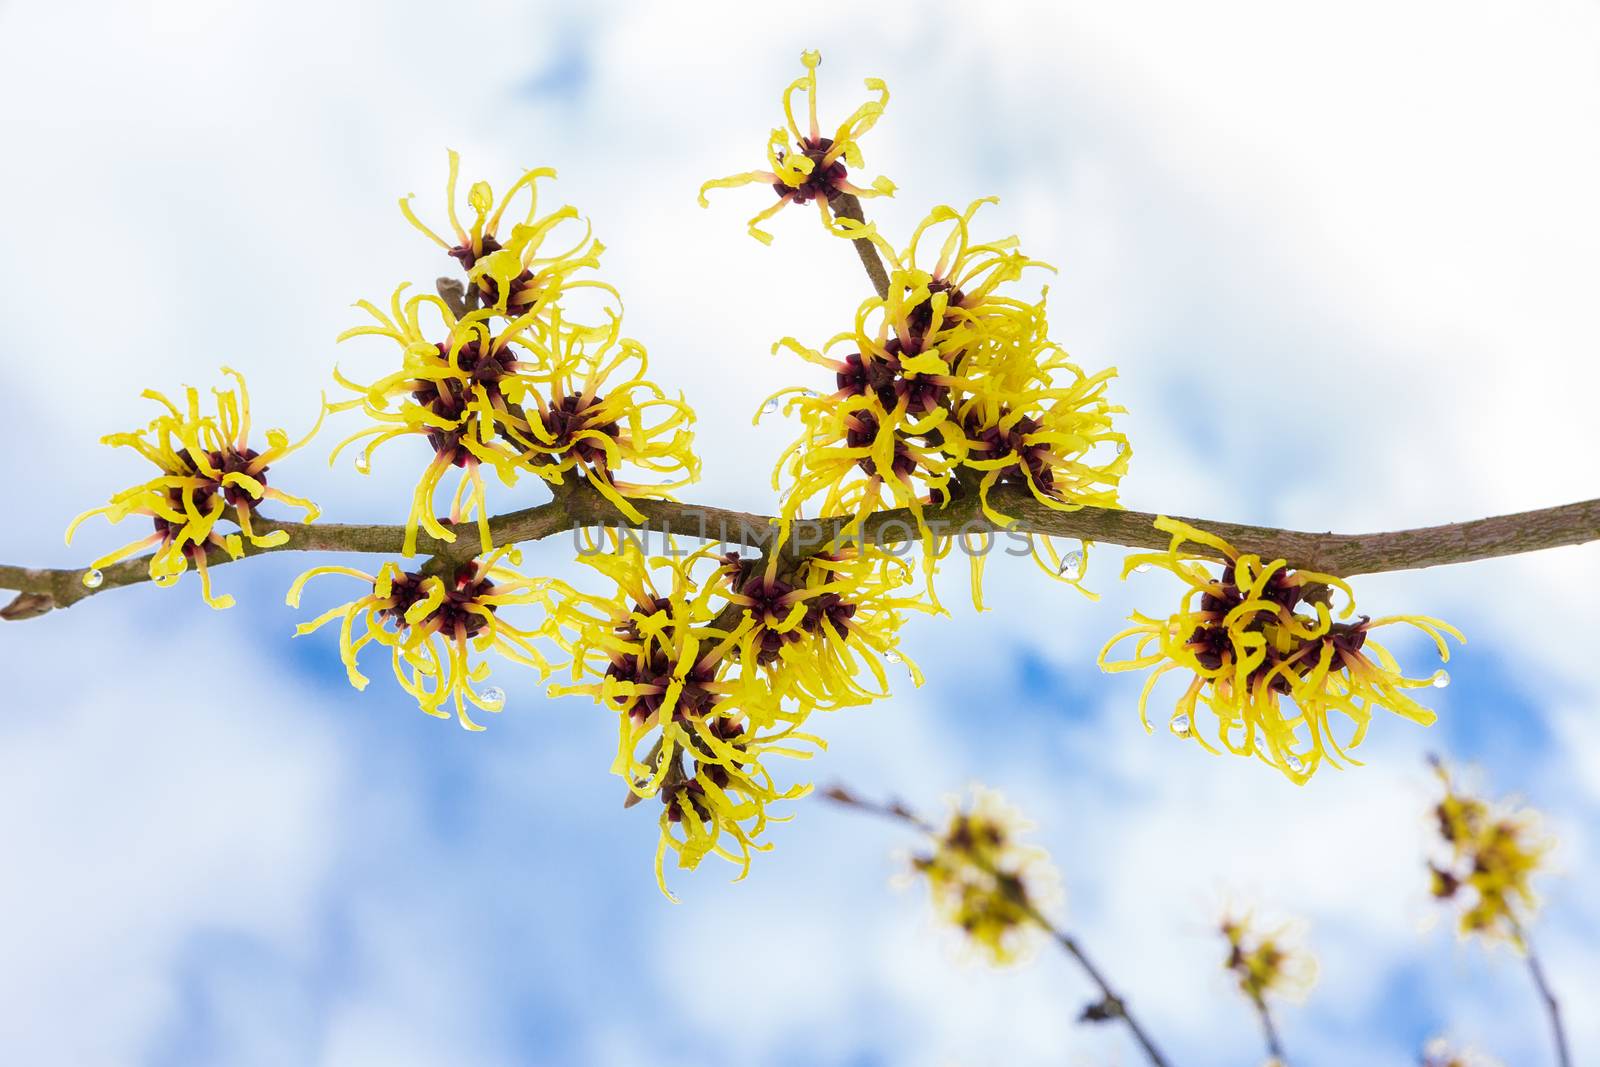 Hazel shrub or Hamamelis mollis with yellow flowers clouds and blue sky